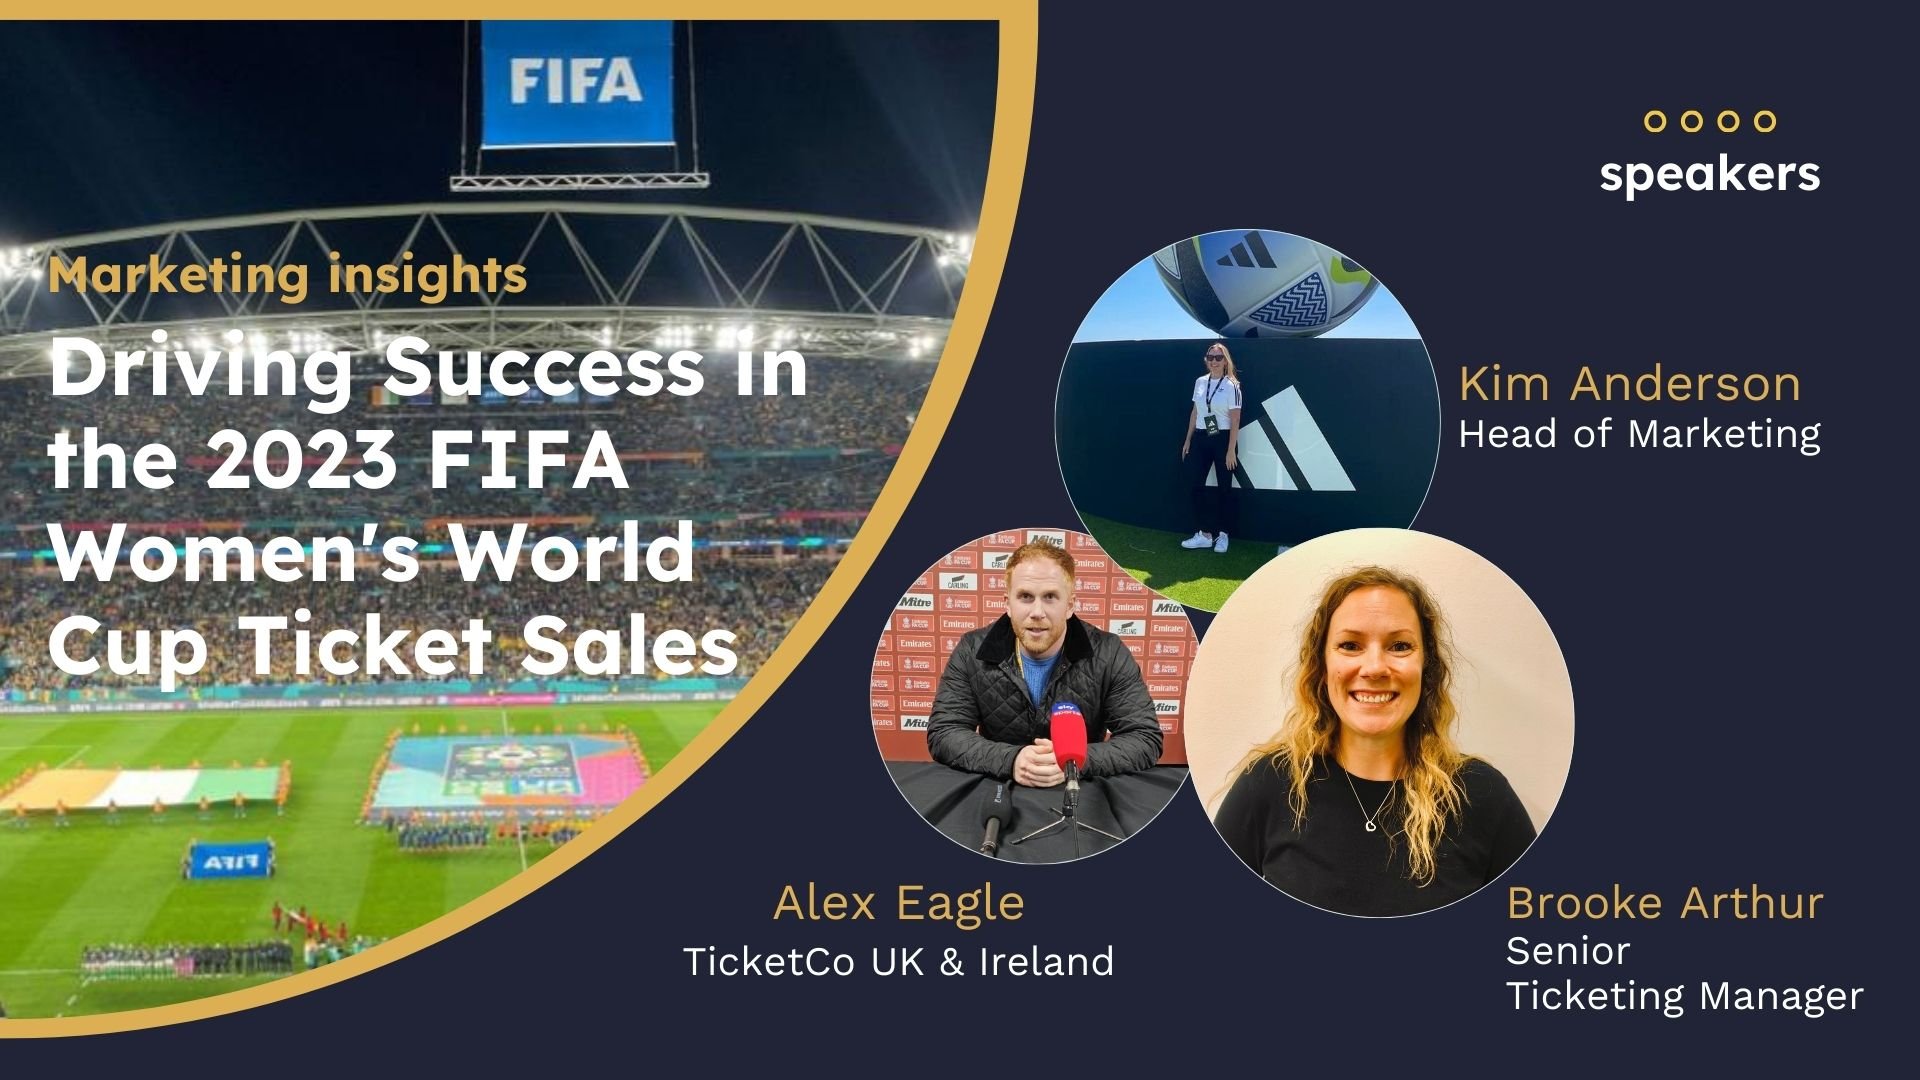 5. Driving Success in the 2023 FIFA Women's World Cup Ticket Sales